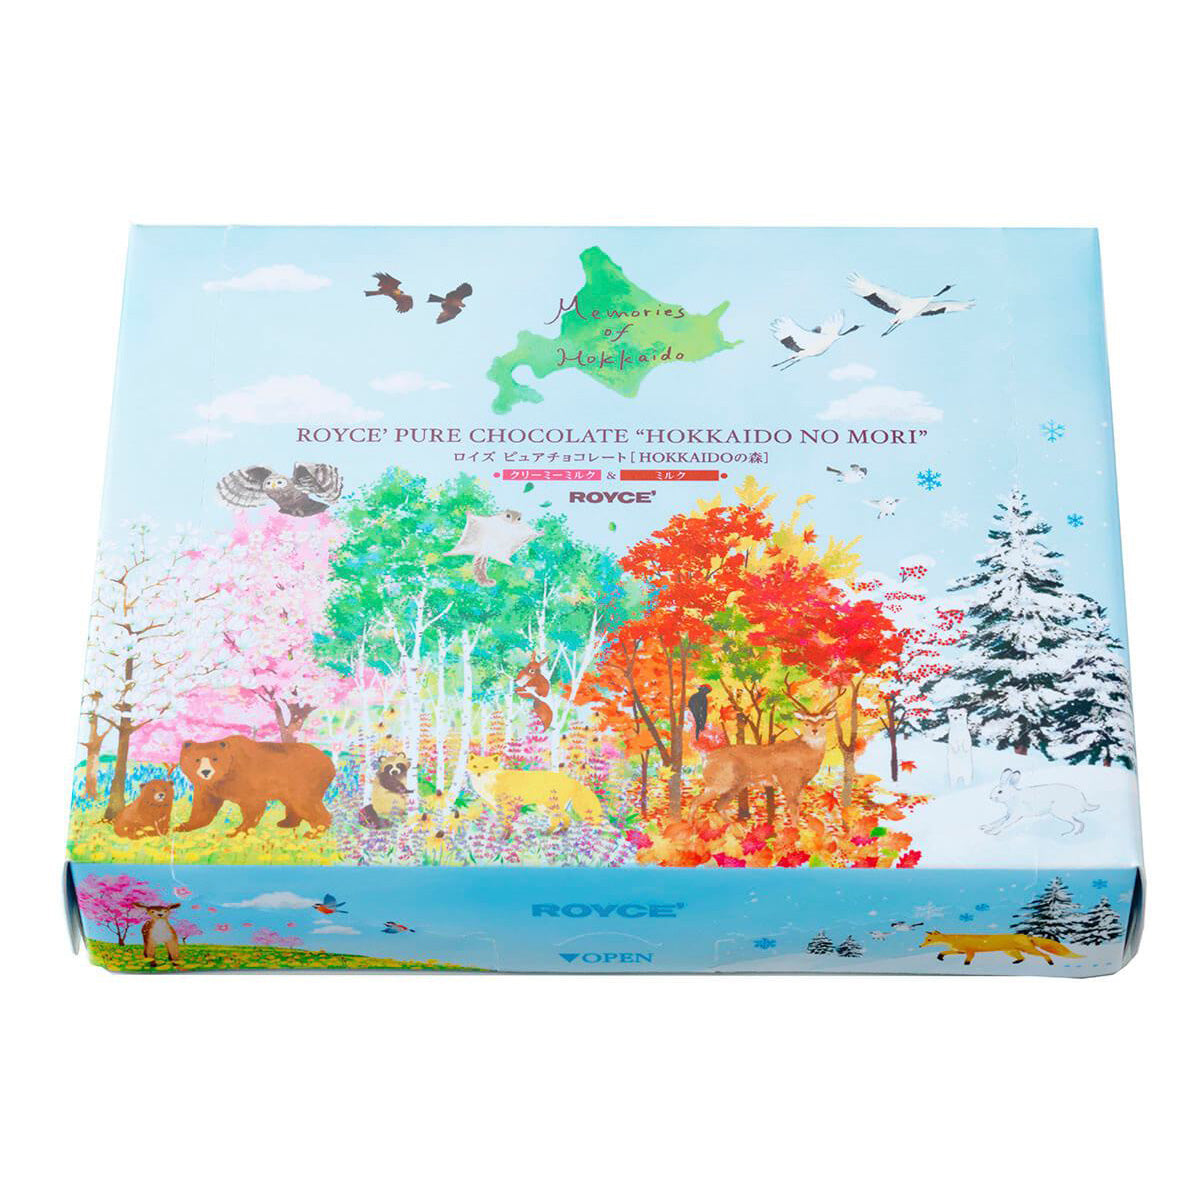 ROYCE' Chocolate - Pure Chocolate "Hokkaido No Mori" - Image shows a tilted blue box with illustrations of animals and plants. Text inside the box says Memories of Hokkaido ROYCE' Pure Chocolate "Hokkaido No Mori" ROYCE'. 